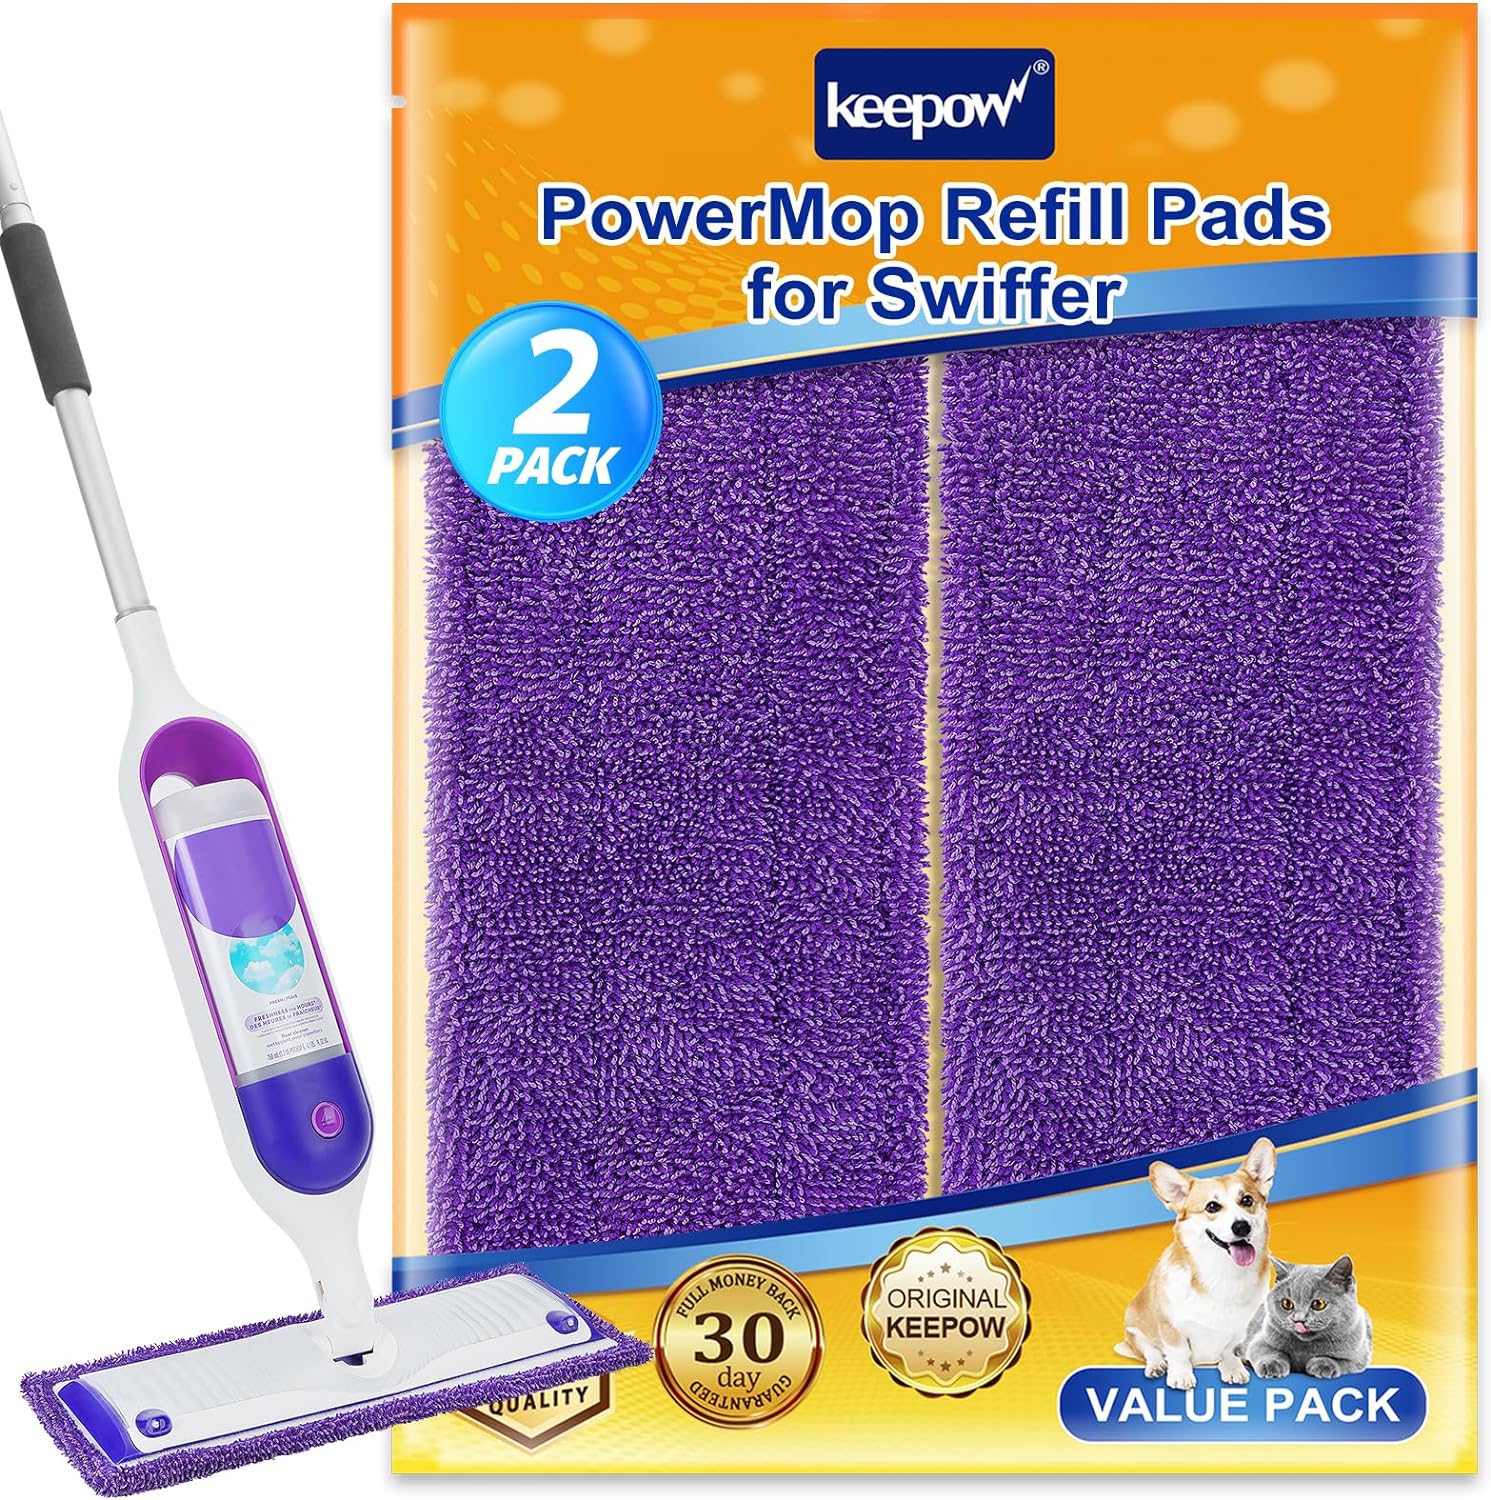 KEEPOW  5705M Reusable Pads for Swiffer Power Mop, Refill Pads for Swiffer Power Mop Wood Floor Cleaning, Microfiber Mop Pads for Hardwood Floors (2 Pack)